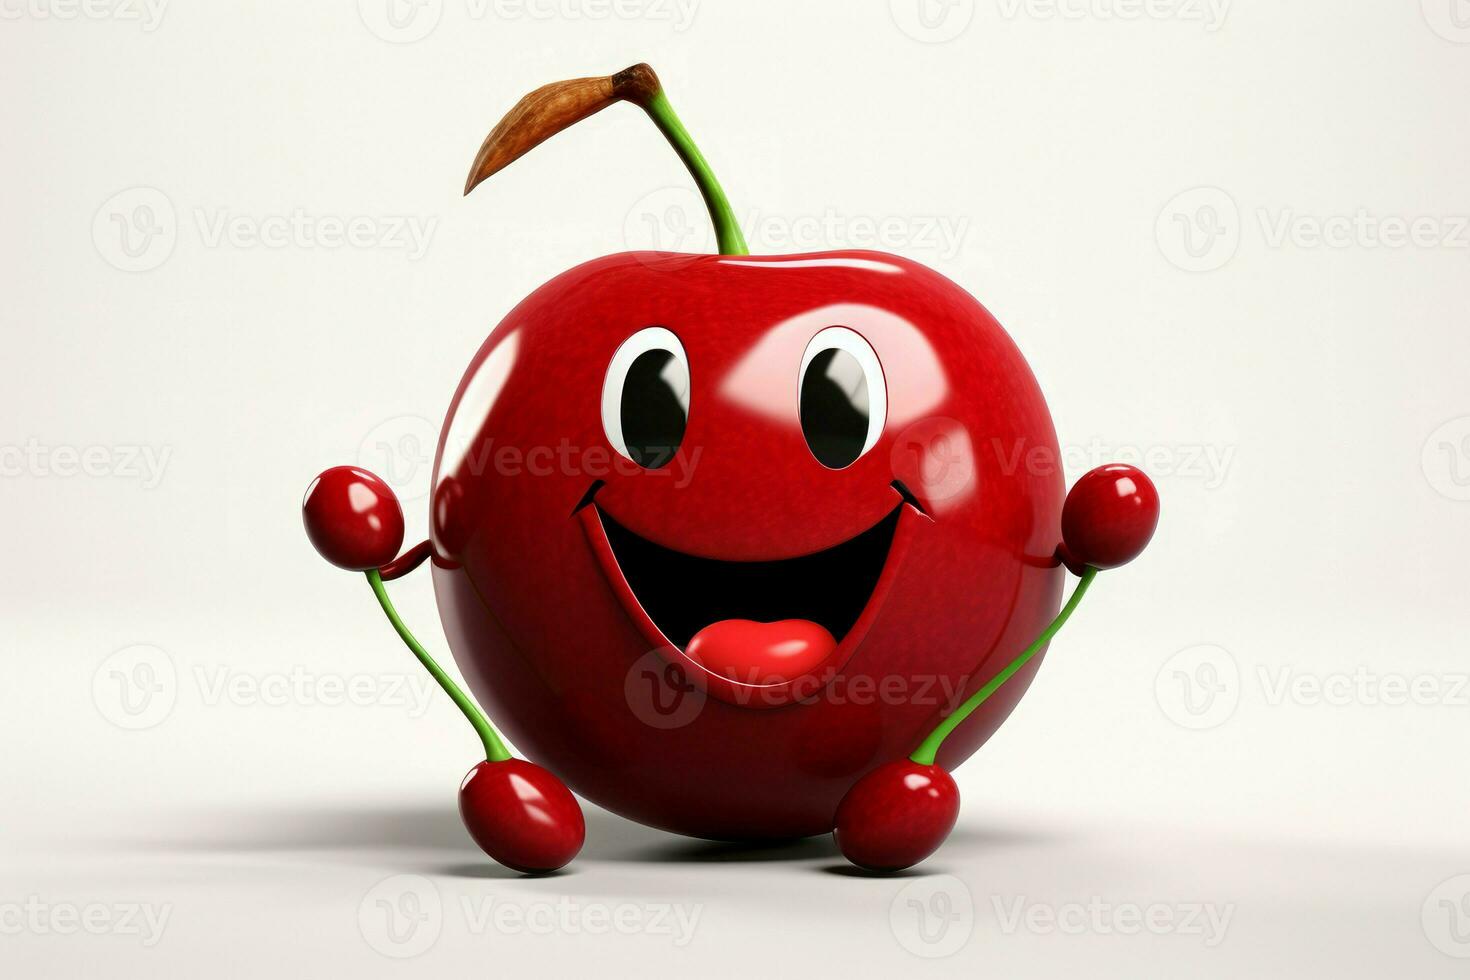 Cheerful Funny cherry character. Smiling fruit art photo